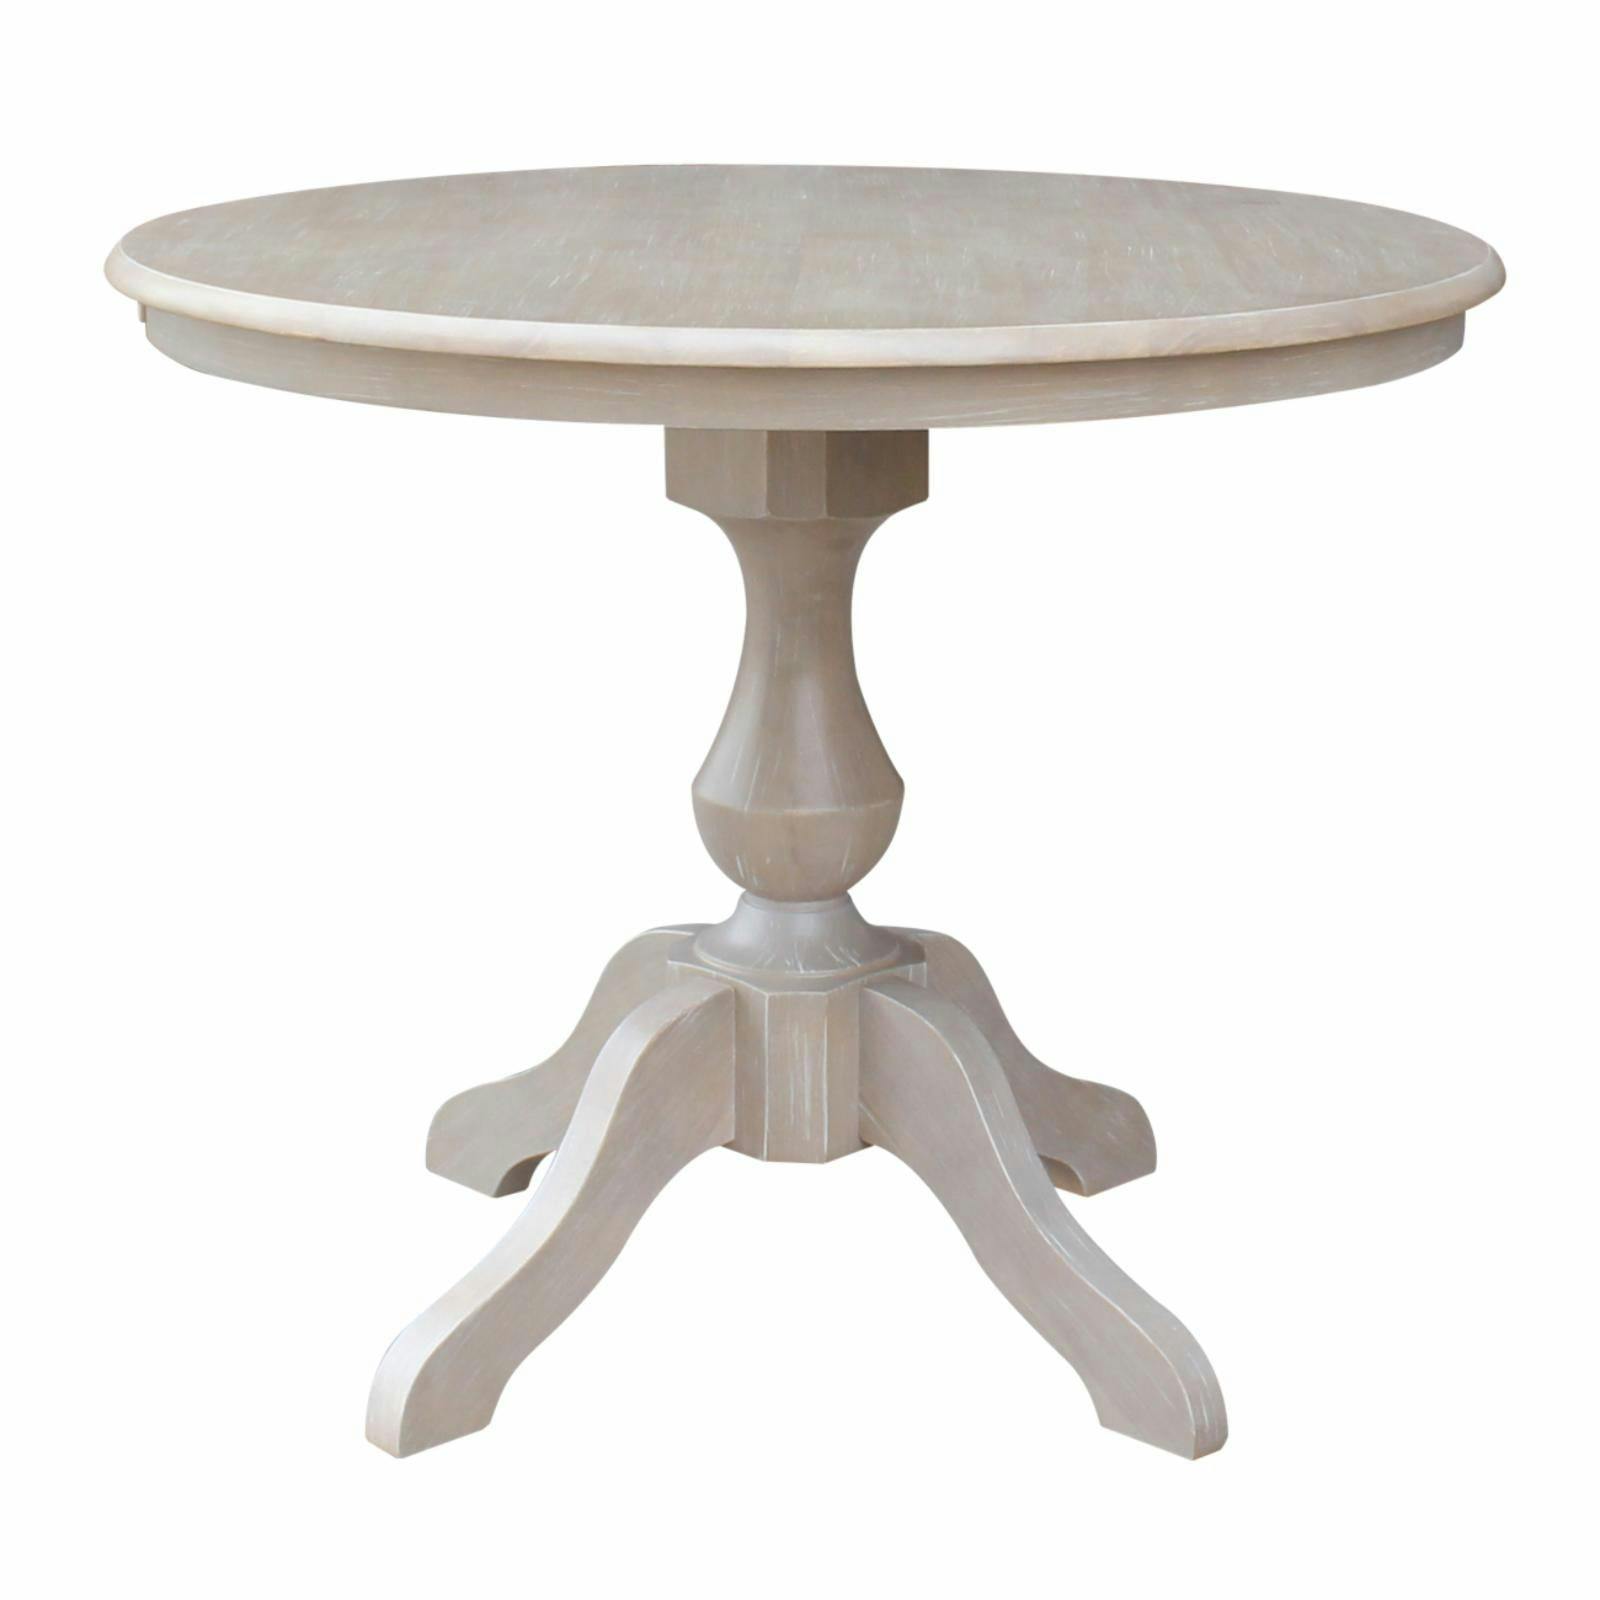 Elegant 38" Solid Wood Round Pedestal Dining Table in Washed Gray